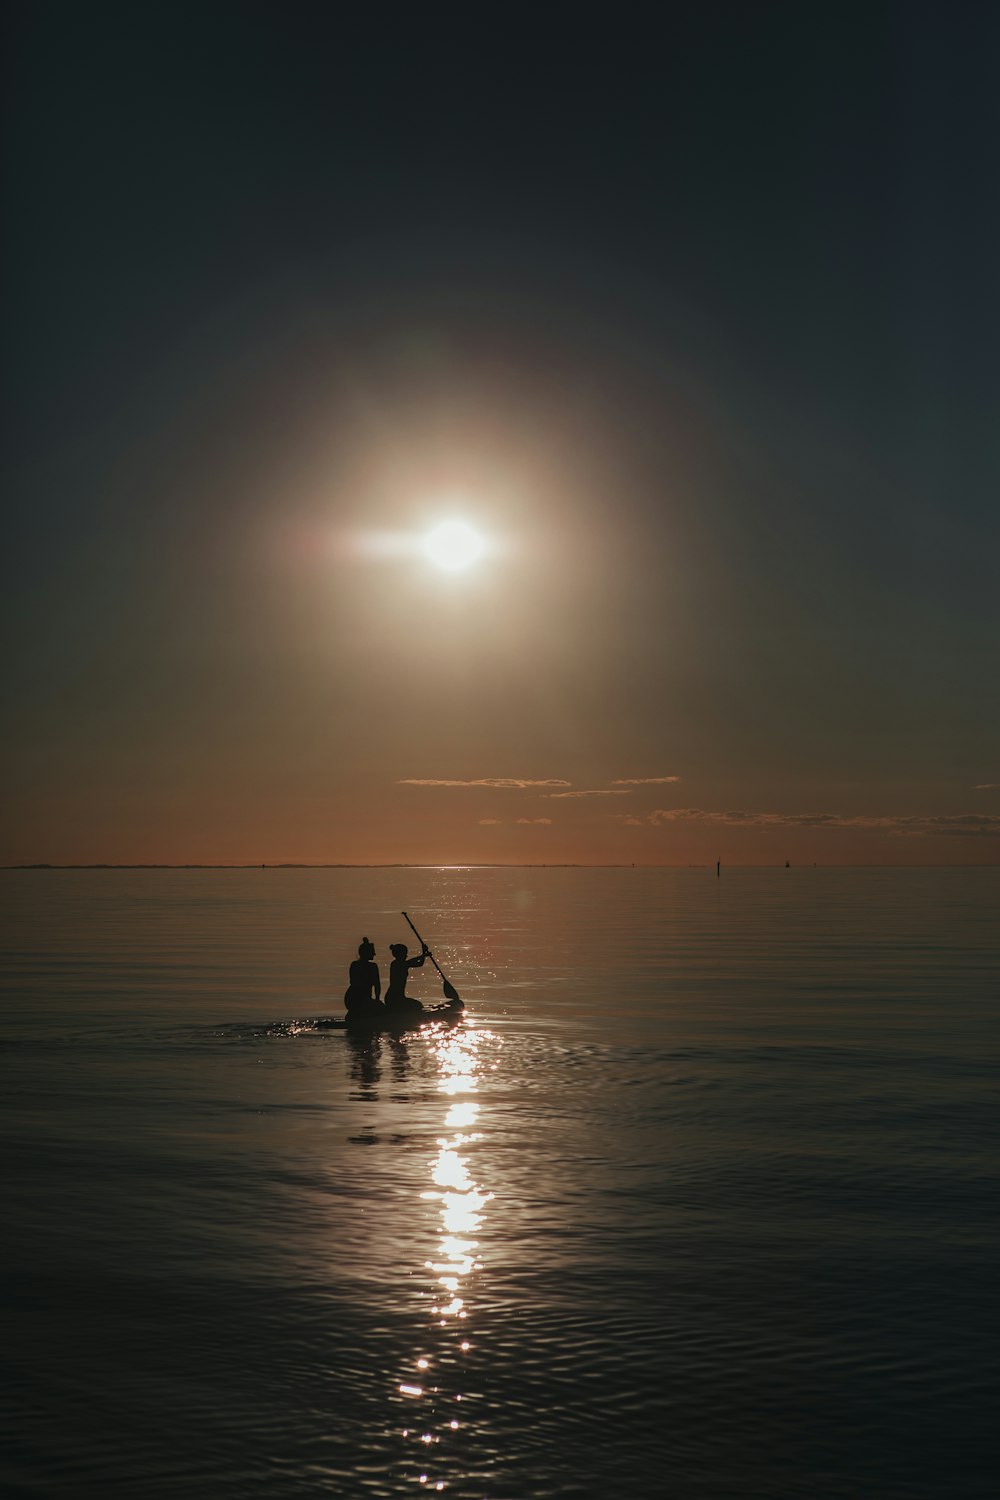 silhouette of two person riding on boat in calm body of water under the sun